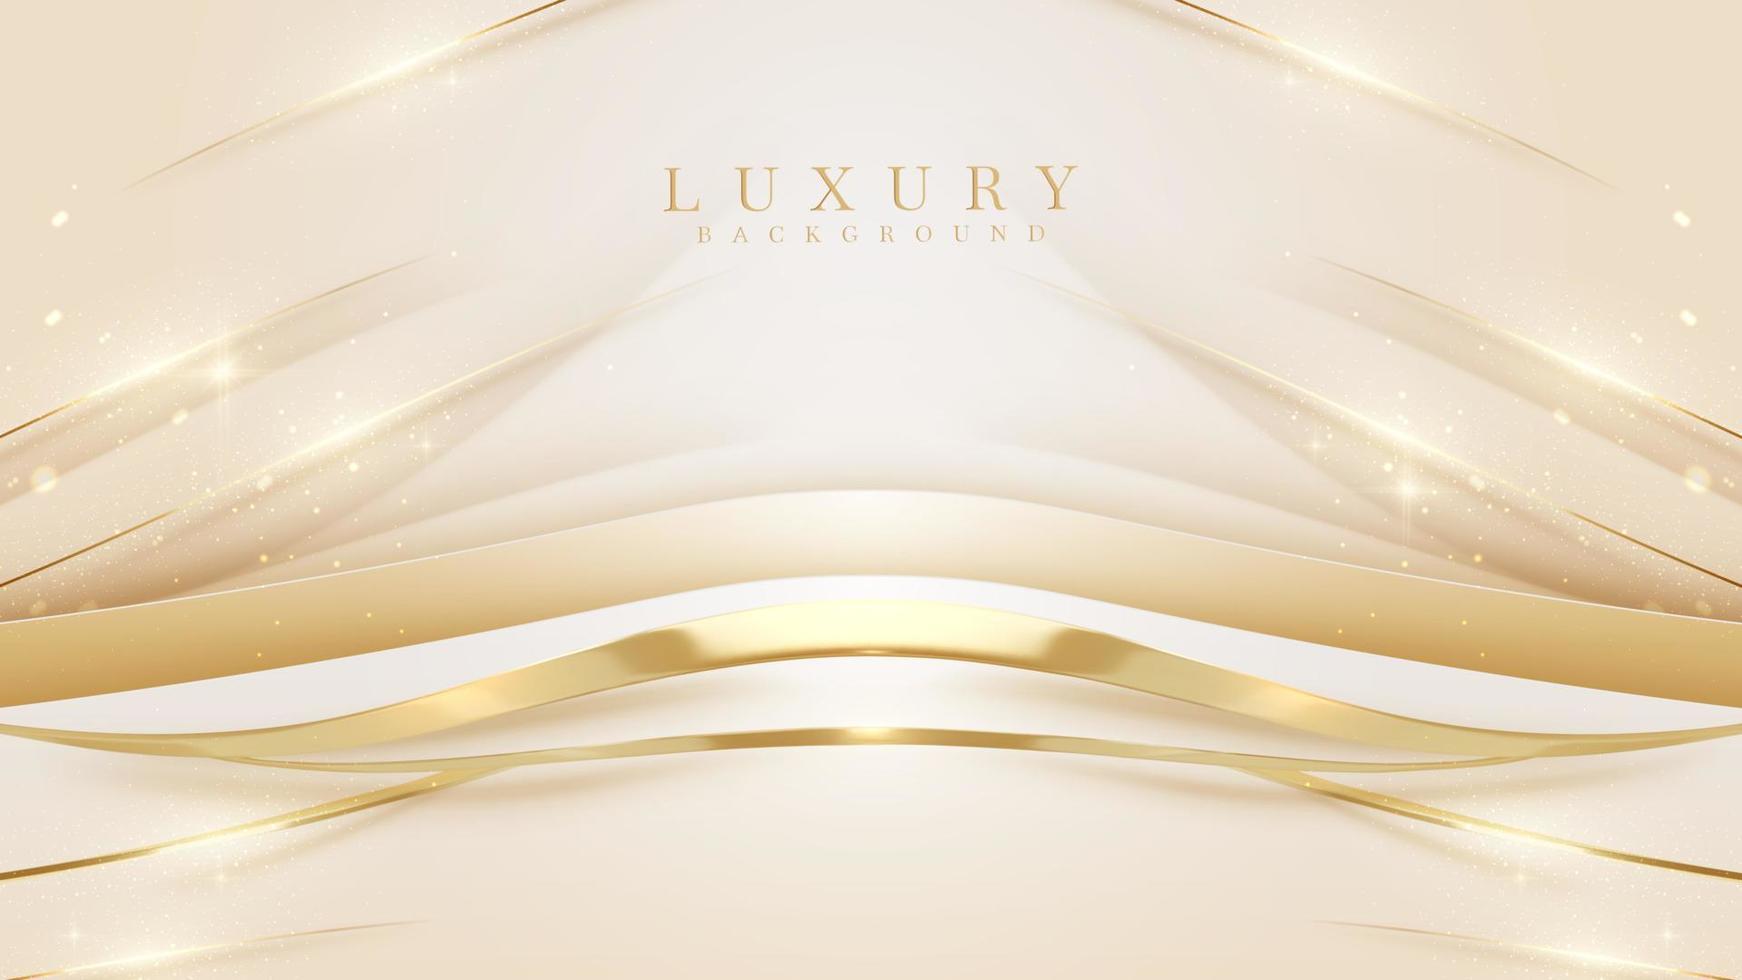 Luxury background with golden curve line elements and glitter light effect decoration. vector